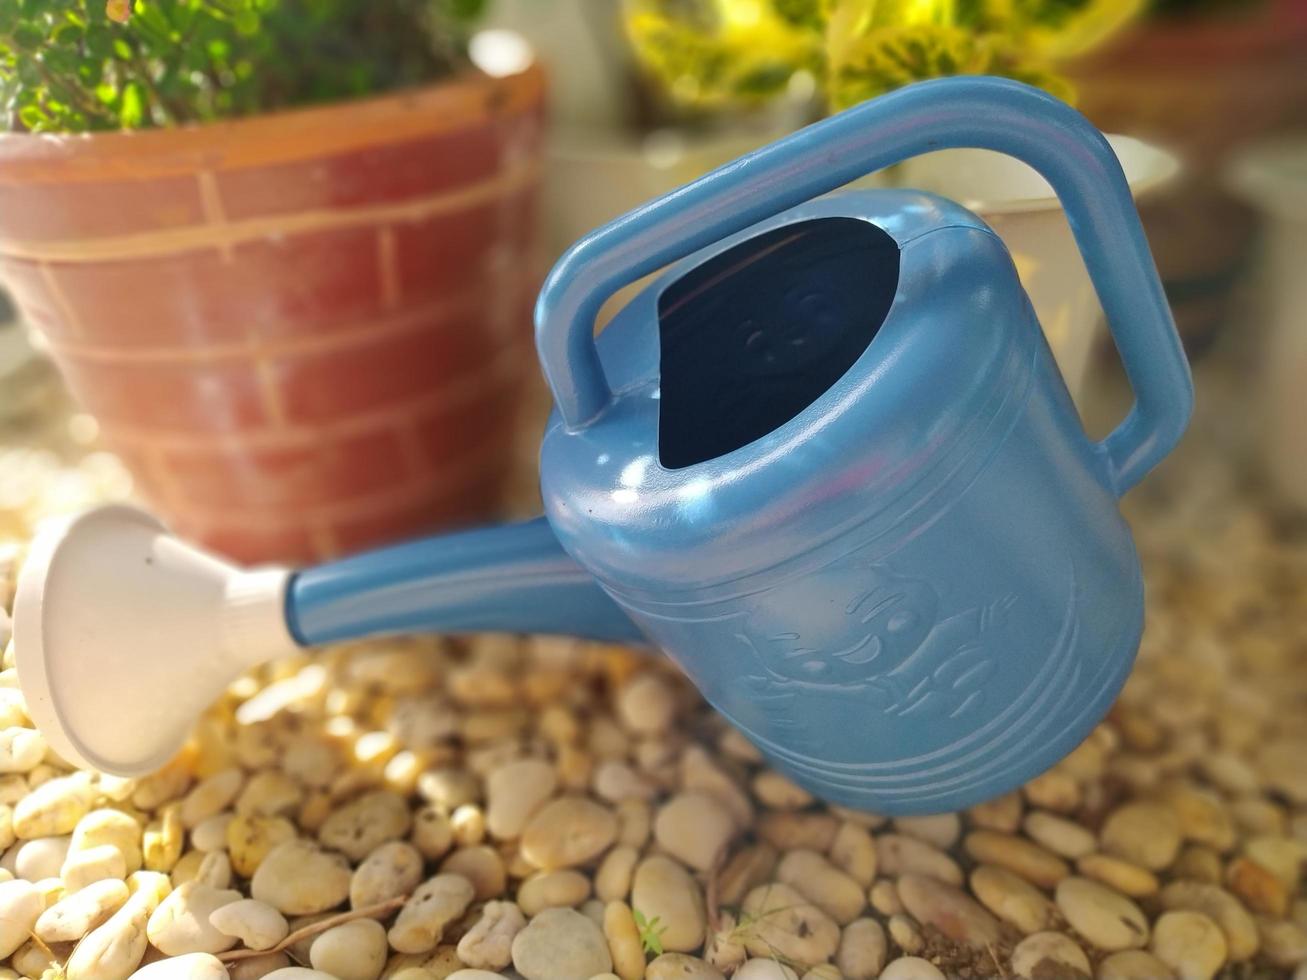 A lovely blue watering can in the garden in the morning. photo